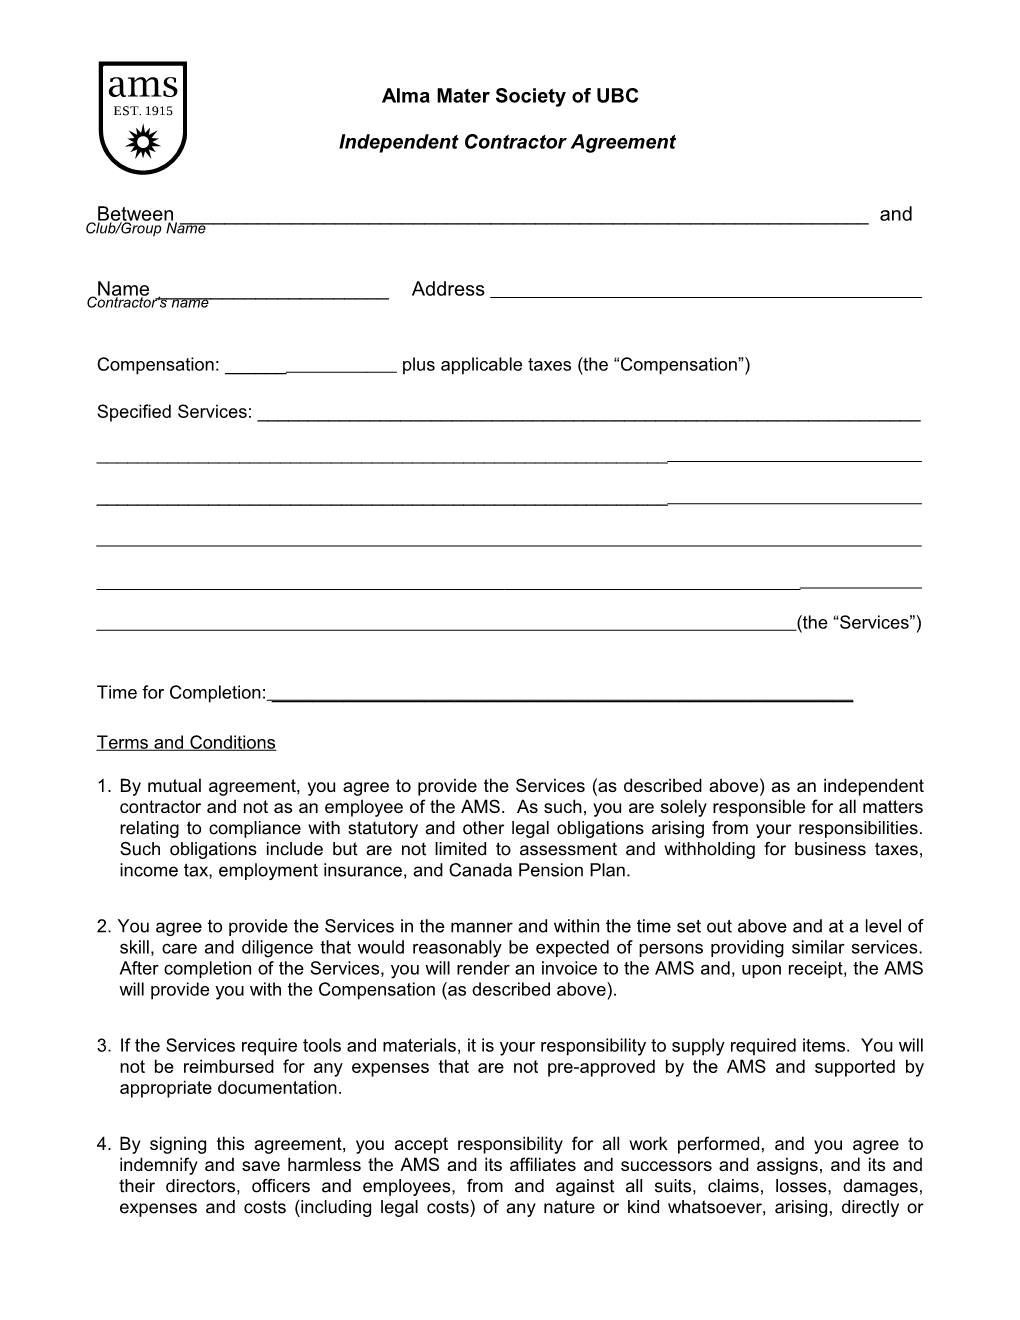 AMS Independent Contractor Agreement